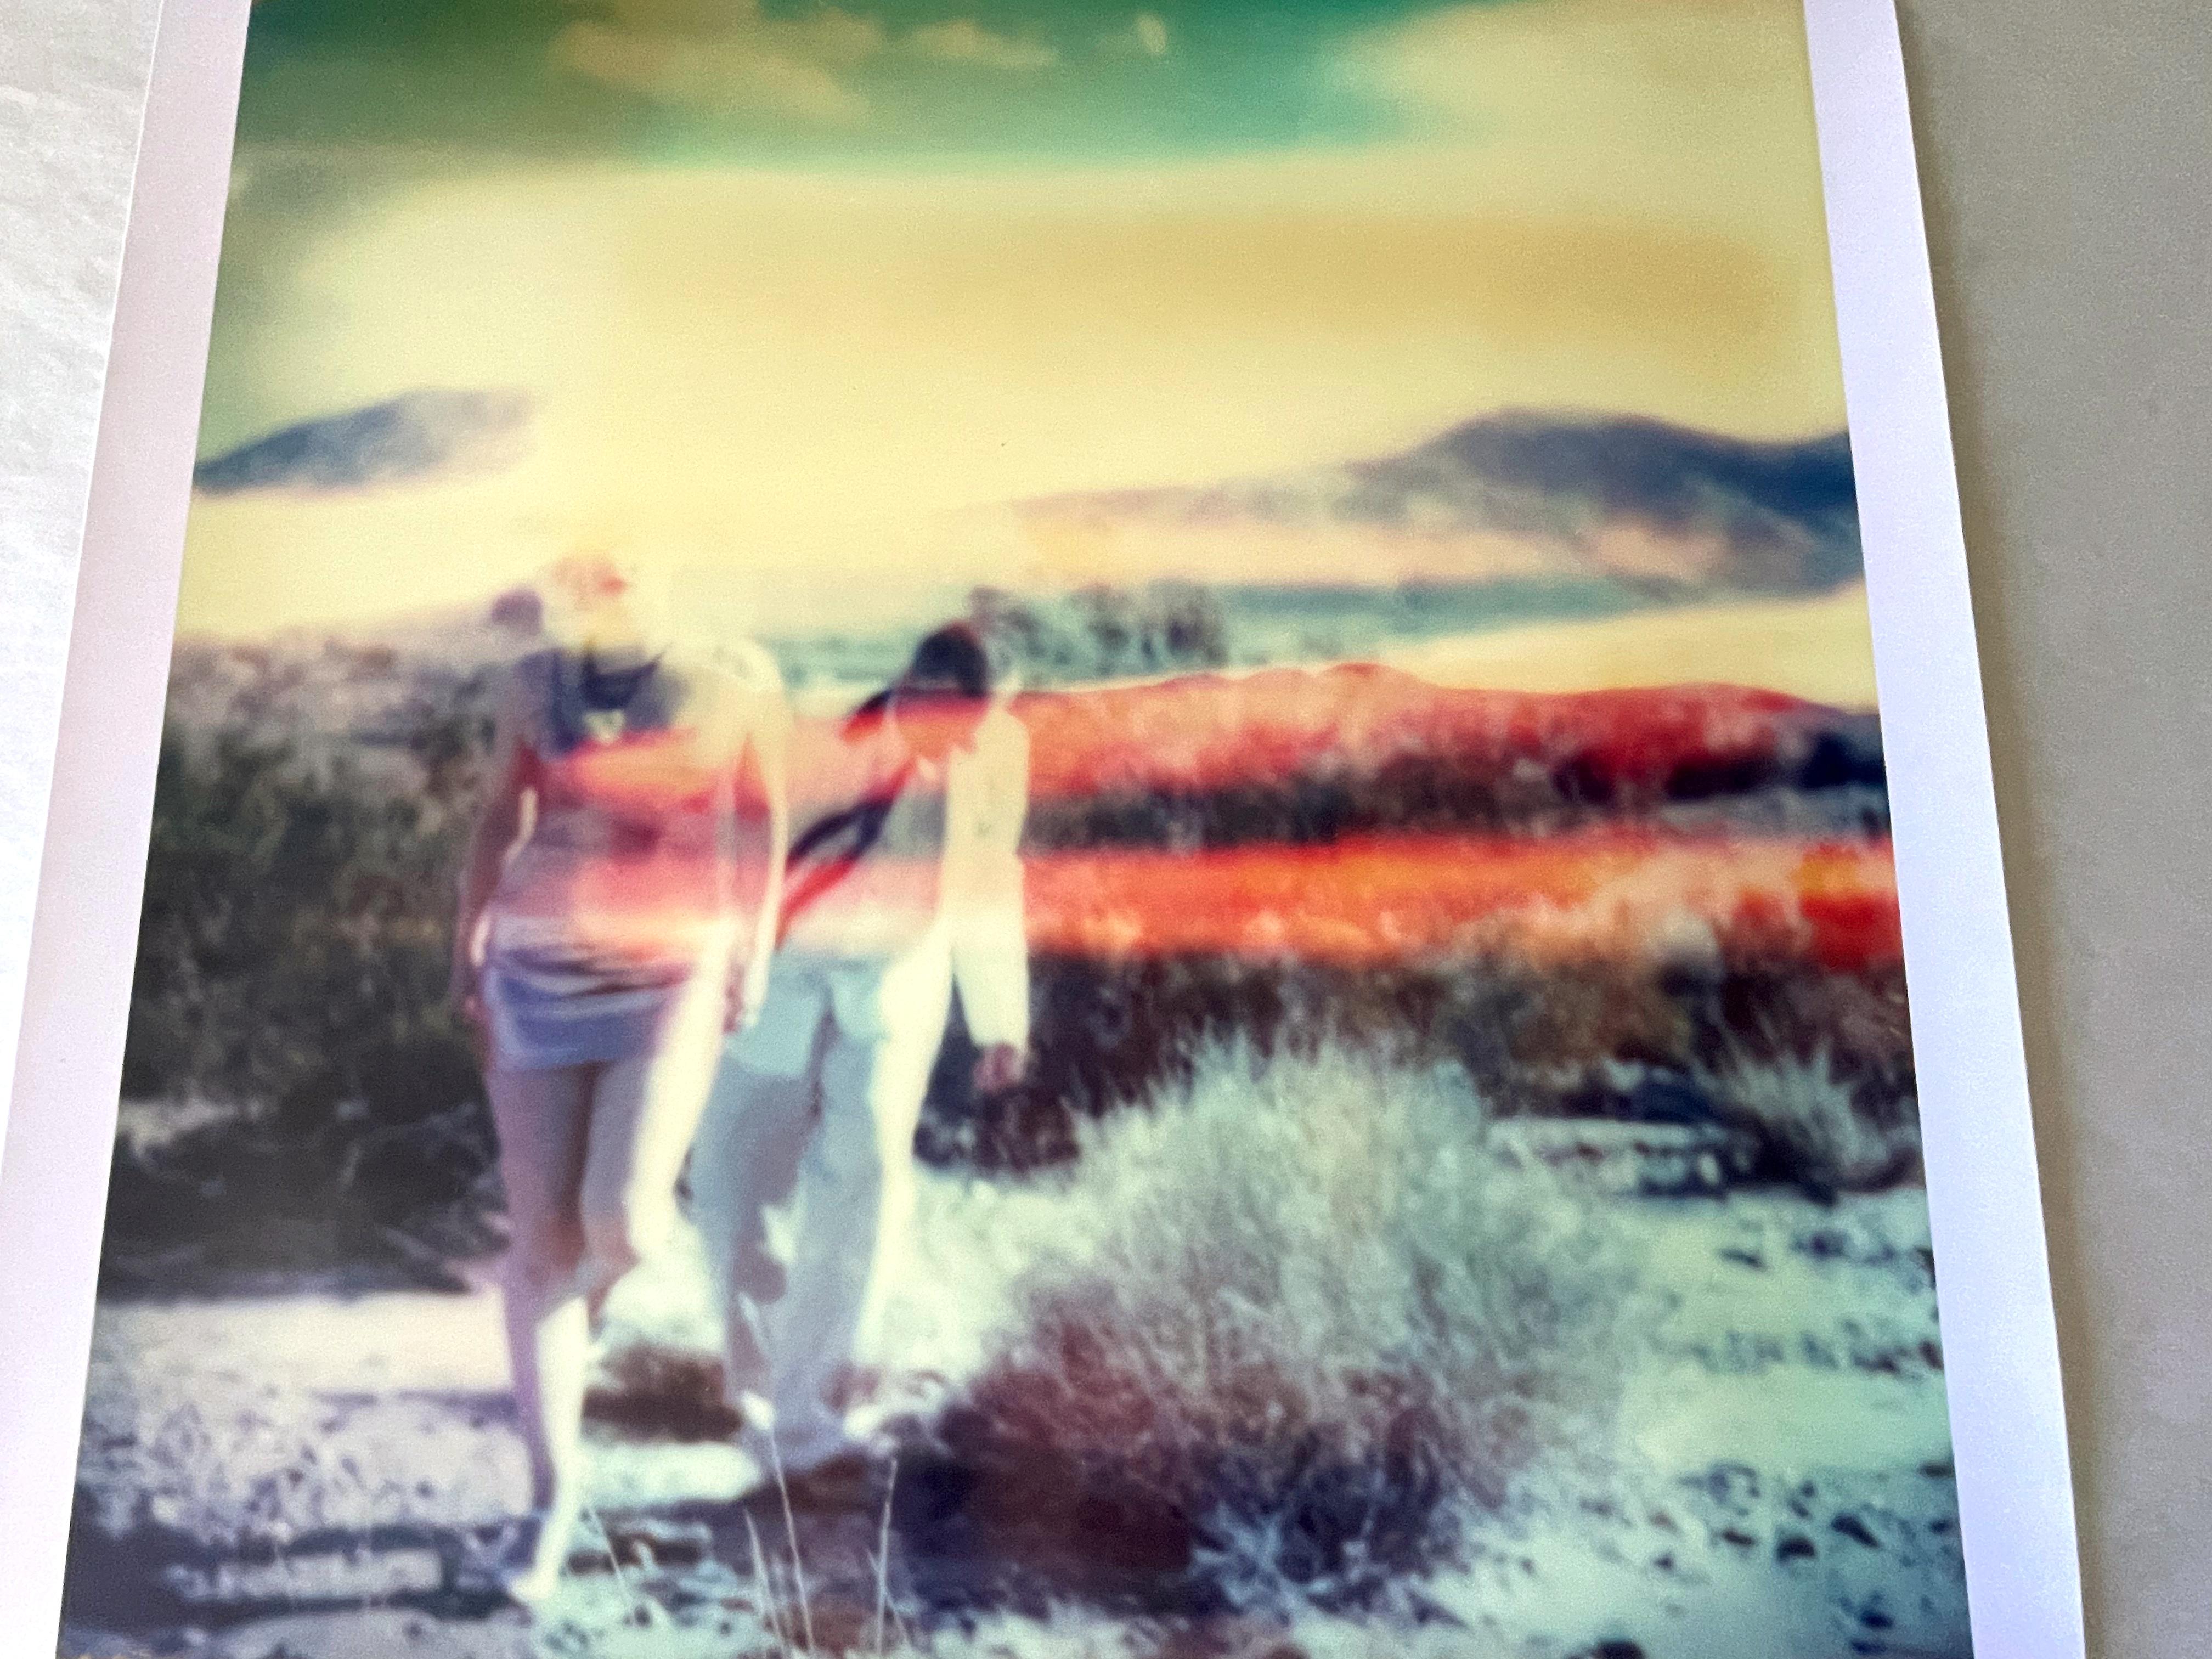 Memory of a Dream (29 Palms, CA) - 2006

38x36cm,
Edition 2/10. 
Archival C-Print, based on the original Polaroid.
Certificate and Signature Label. 
Artist inventory Number 3602.
Not mounted.

Ephemeral Reverie: Embracing Imperfection

